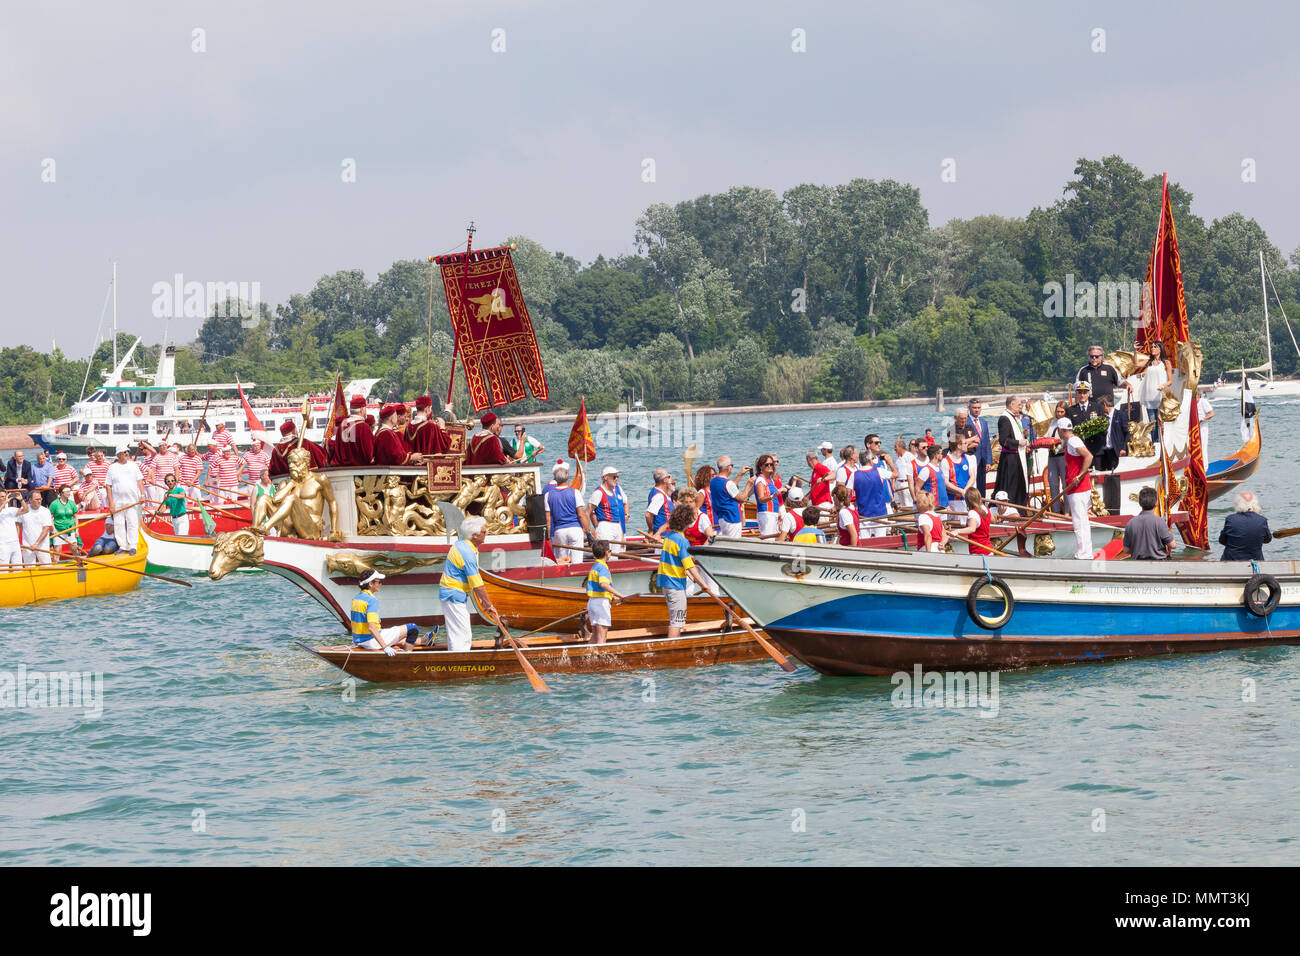 Venice, Veneto, Italy.  13th May 2018.  The cortege or corteo  of rowers in the boats accompanying the Serenissama ceremonial boat during Festa de la Sensa with the dignatories Mayor Brugnaro, the Head of the Navy  and Patriarch of Venice,  at Lido during the ceremony for the blessing of the gold ring by the Patriach  which is then tossed into the lagoon marrying Venice to the sea. Credit Mary Clarke/Alamy Live News Stock Photo